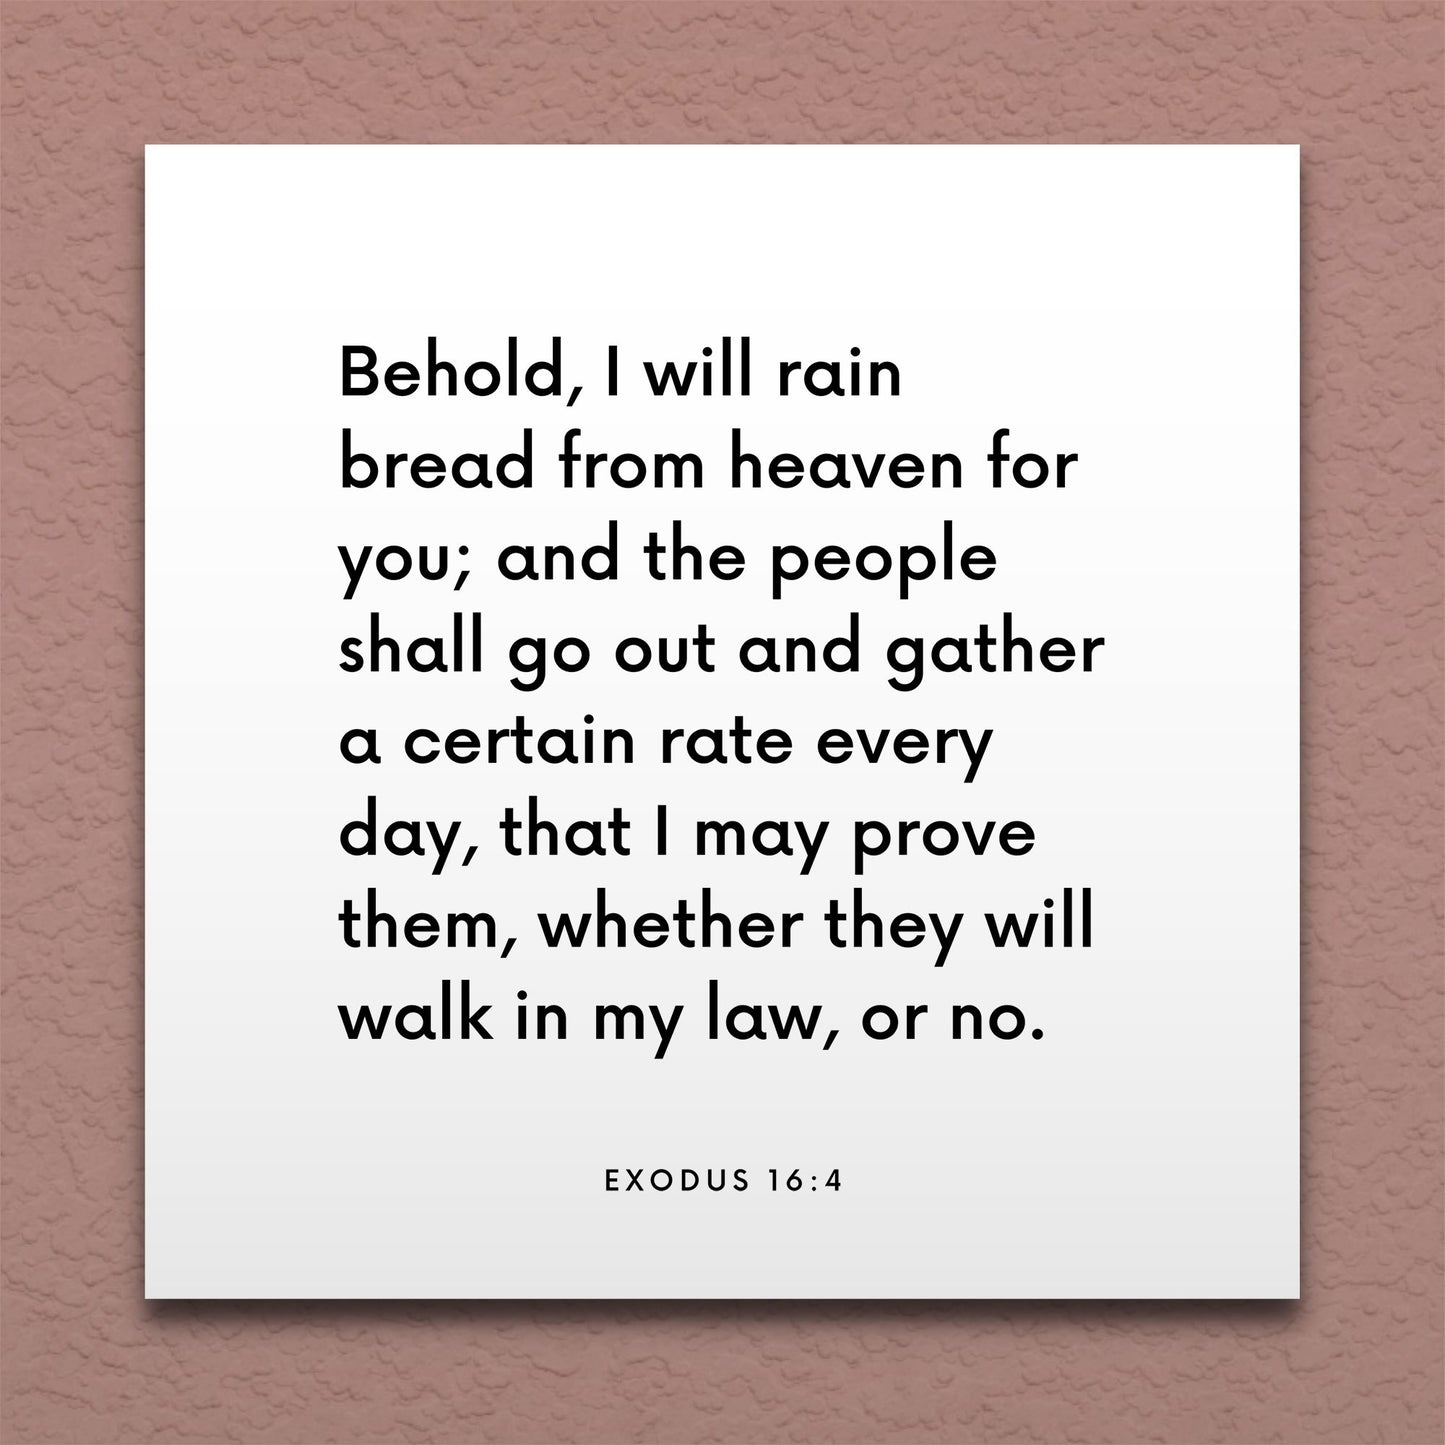 Wall-mounted scripture tile for Exodus 16:4 - "That I may prove them, whether they will walk in my law"